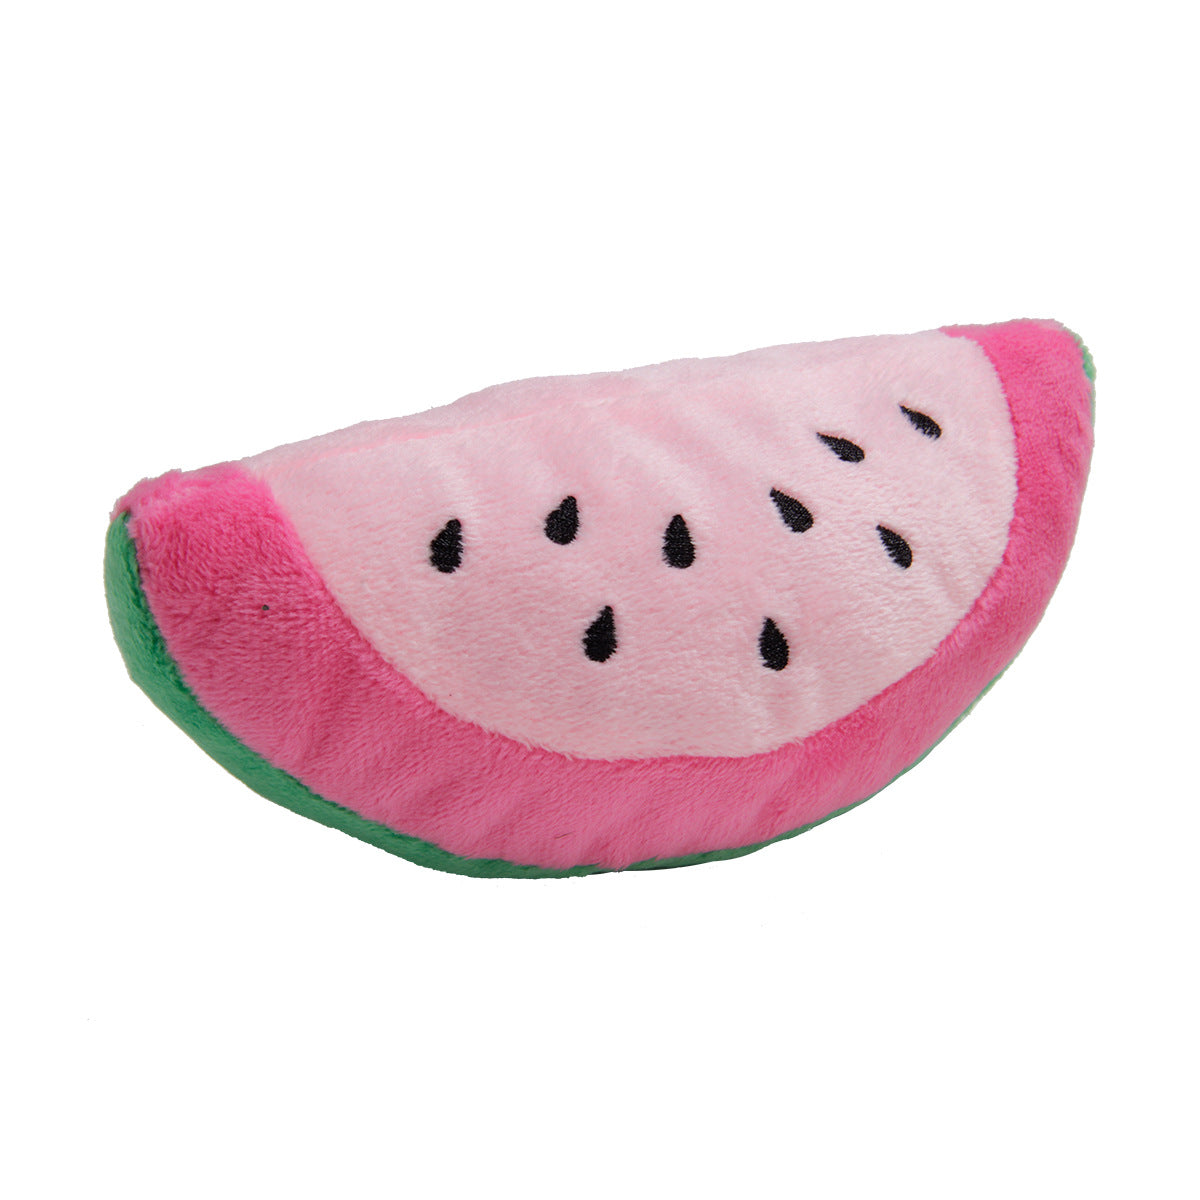 Thewisewag UAE pet dog STORE toy pink watermelon